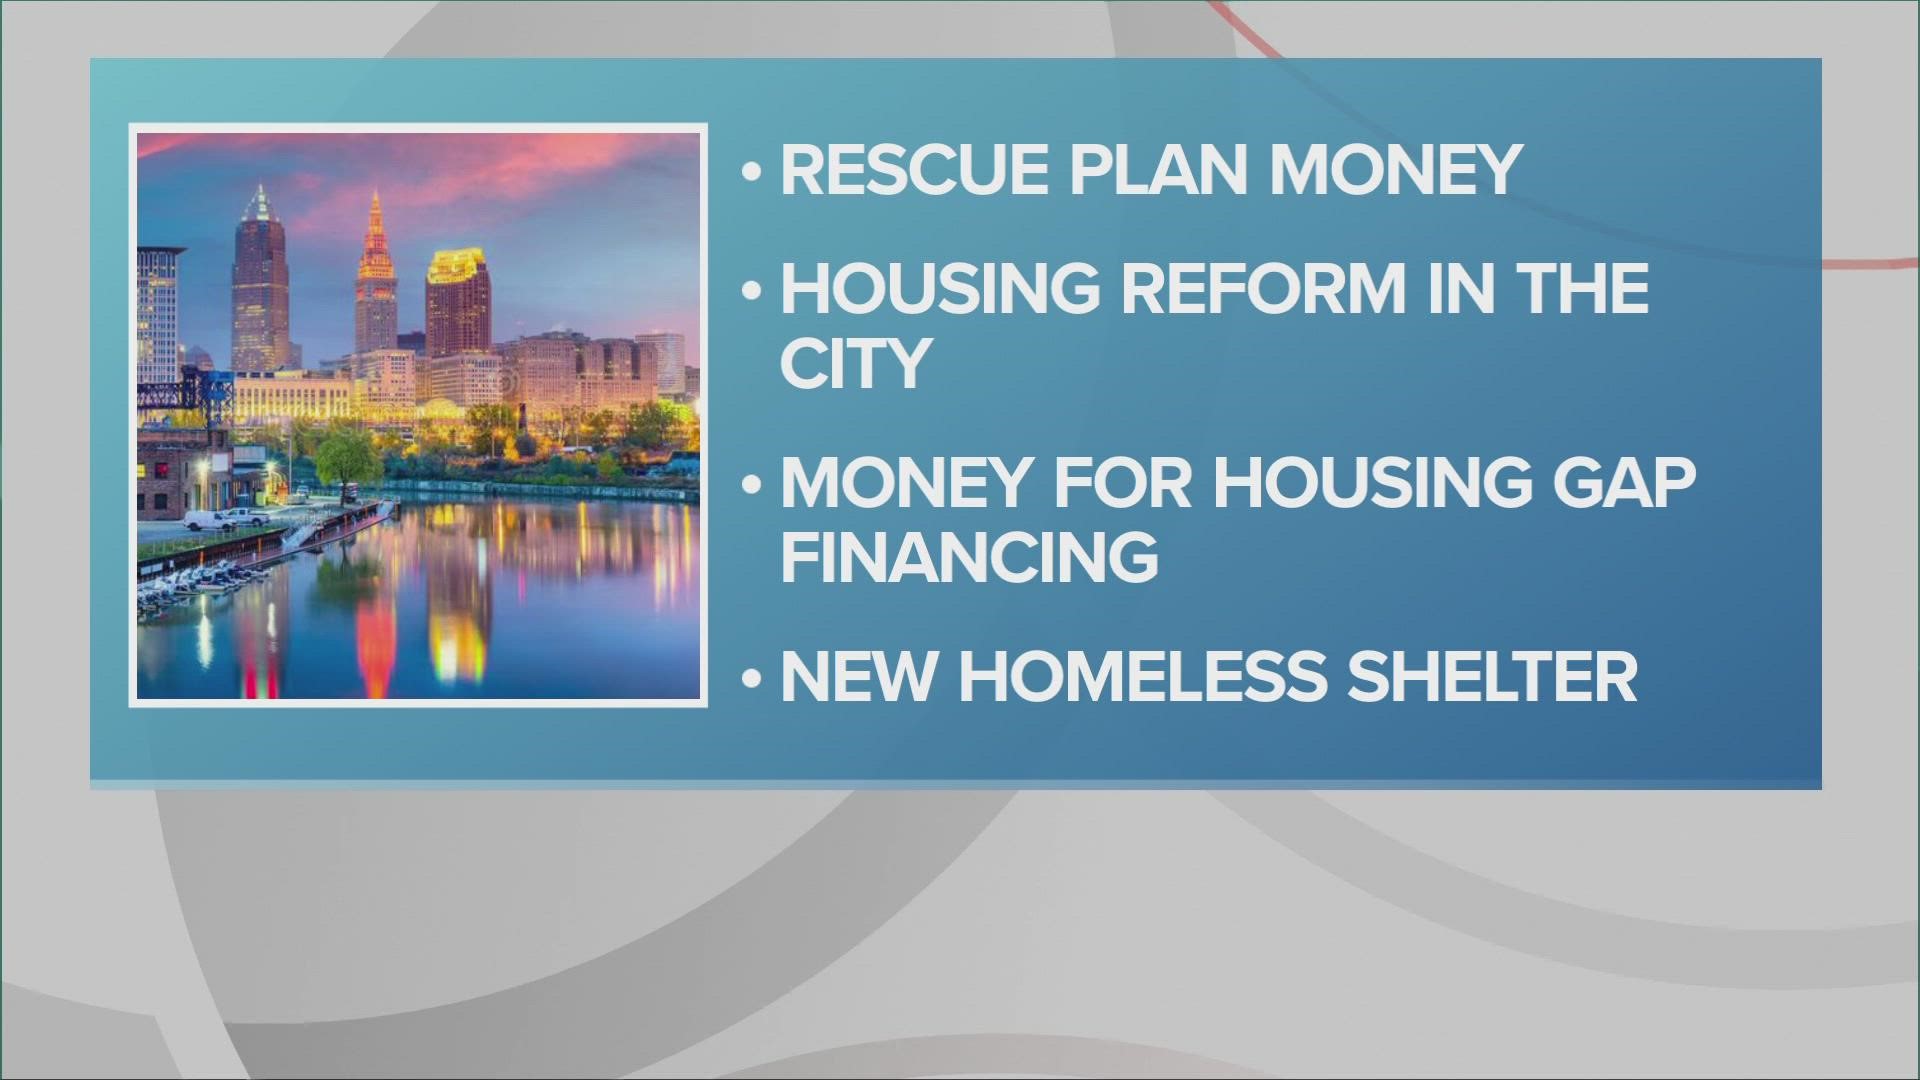 The largest portion of the funding is $35 million to provide “gap financing” for affordable and market-rate housing in the city.